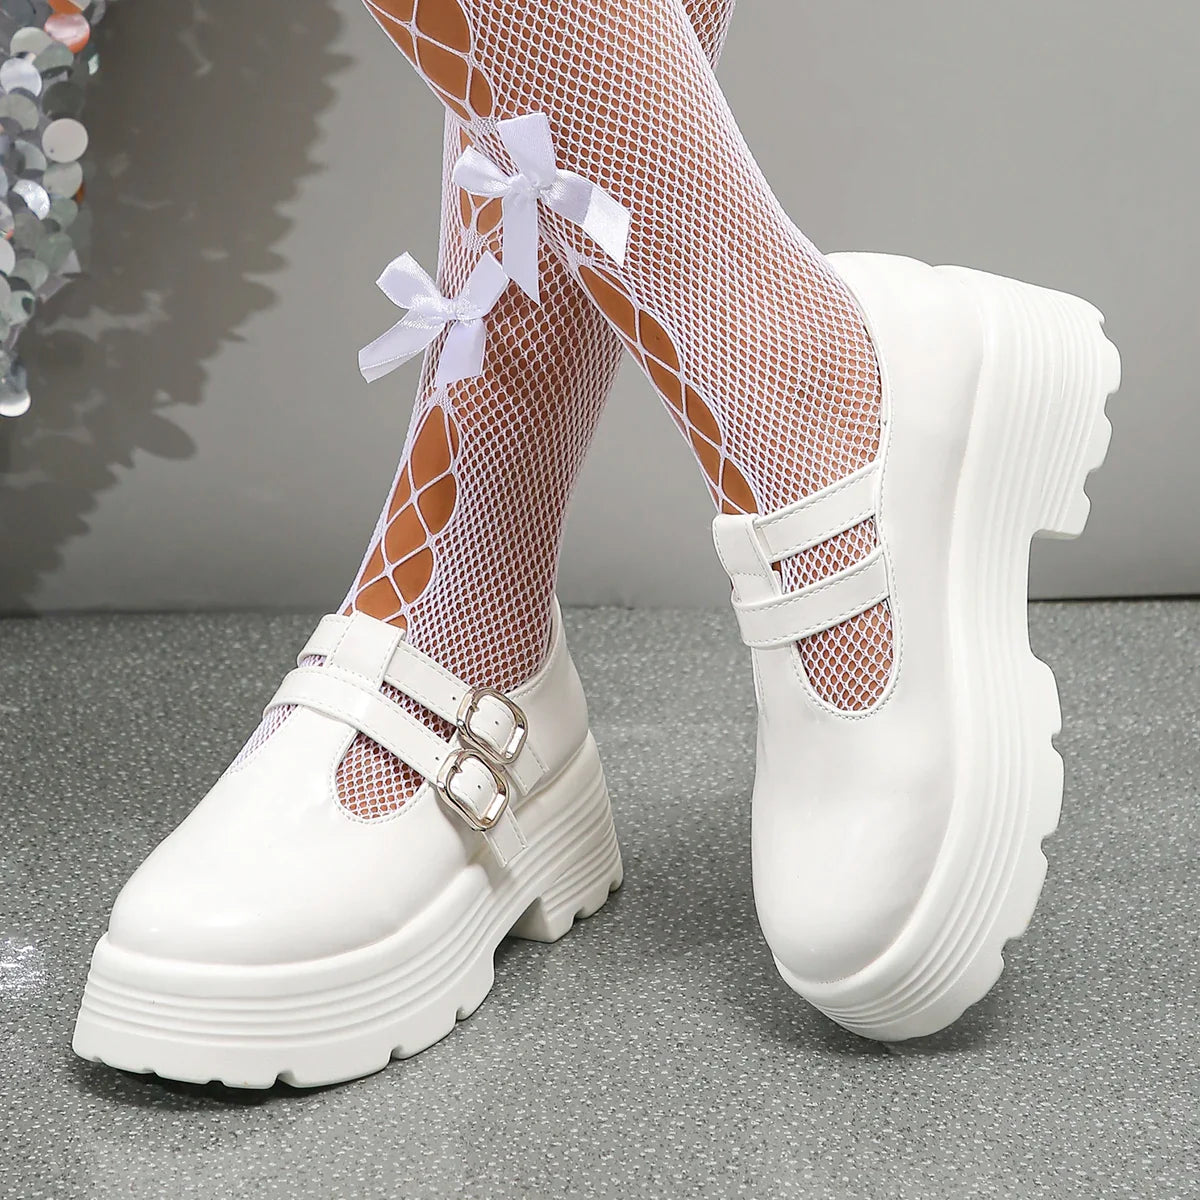 Gominglo - Chunky Platform Shoes for Women Patent Leather Double Buckle Strap